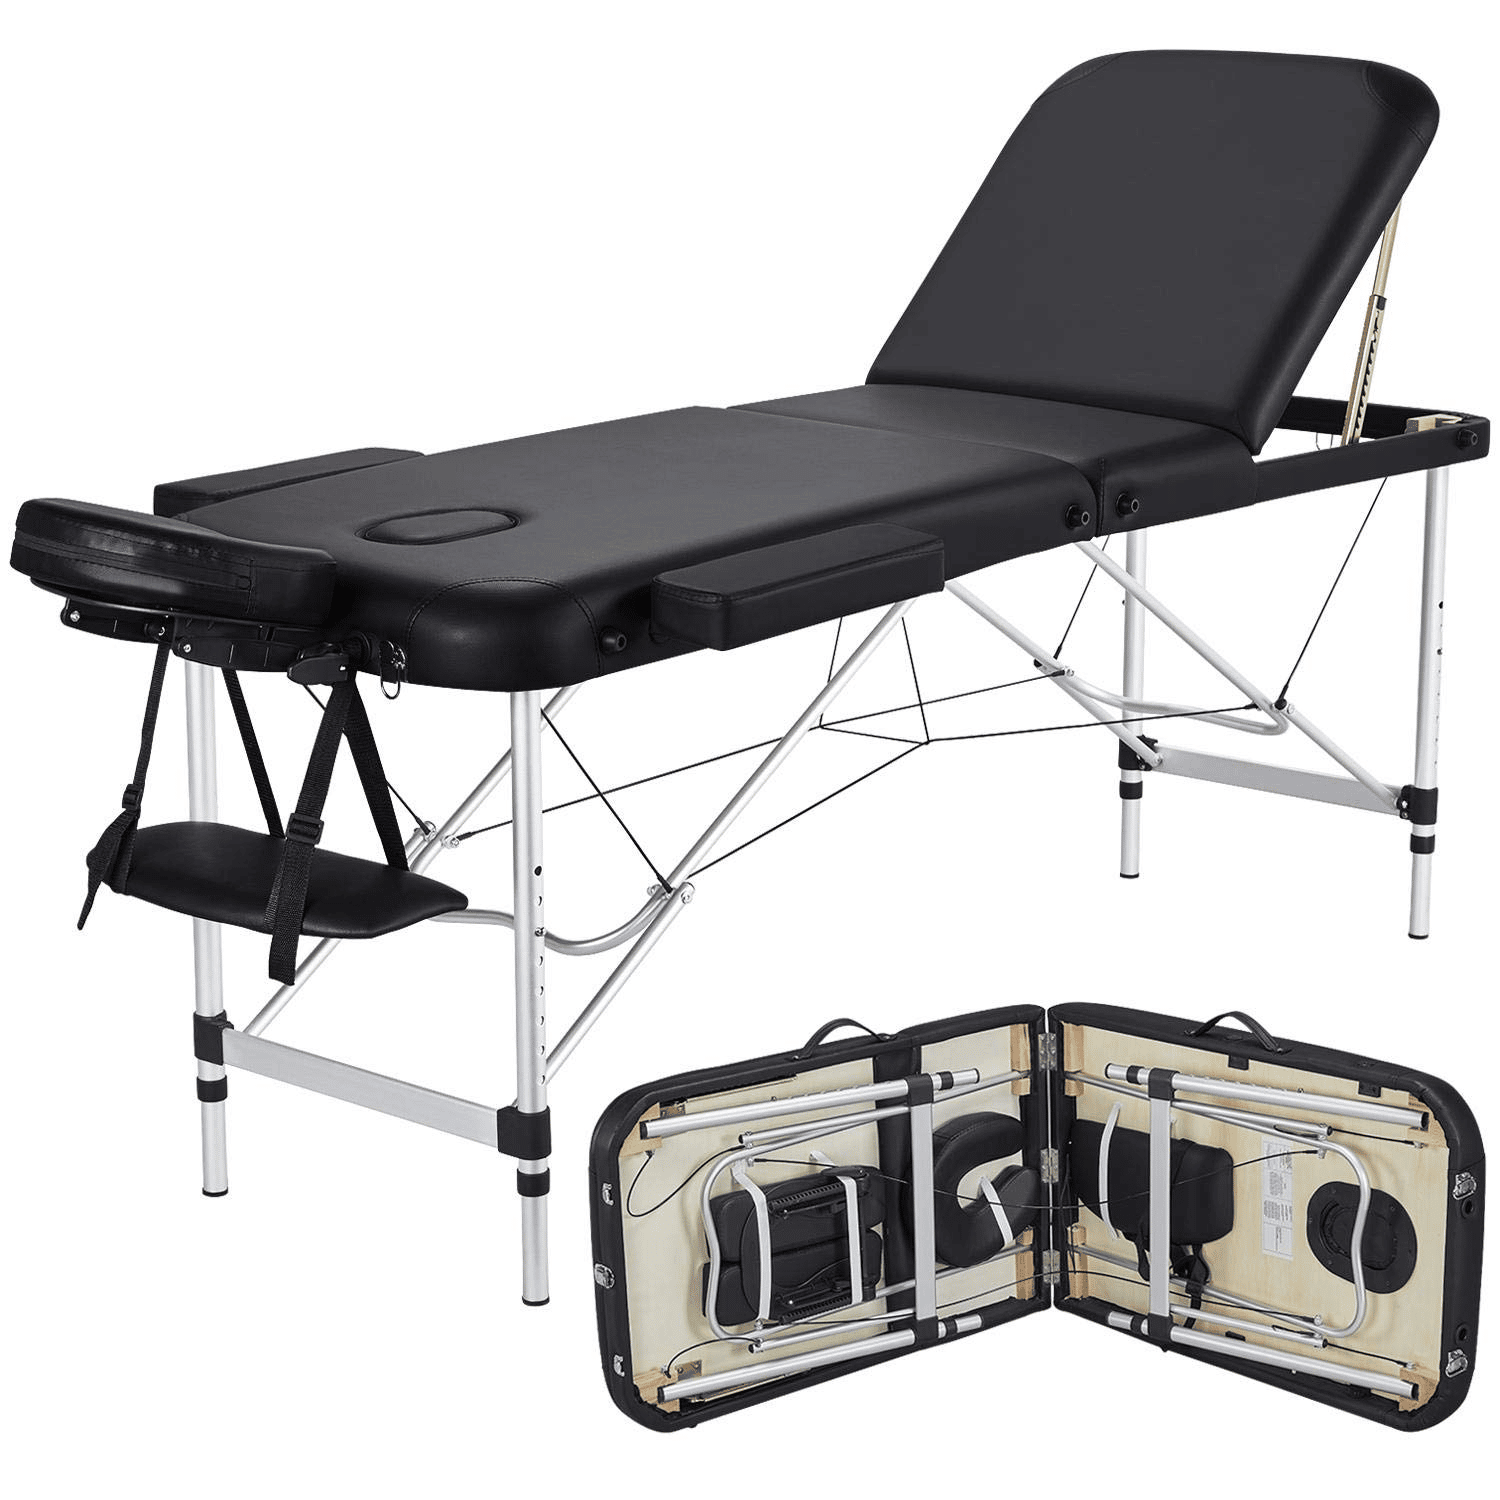 The 10 Best Massage Tables for Waxing (Buyer